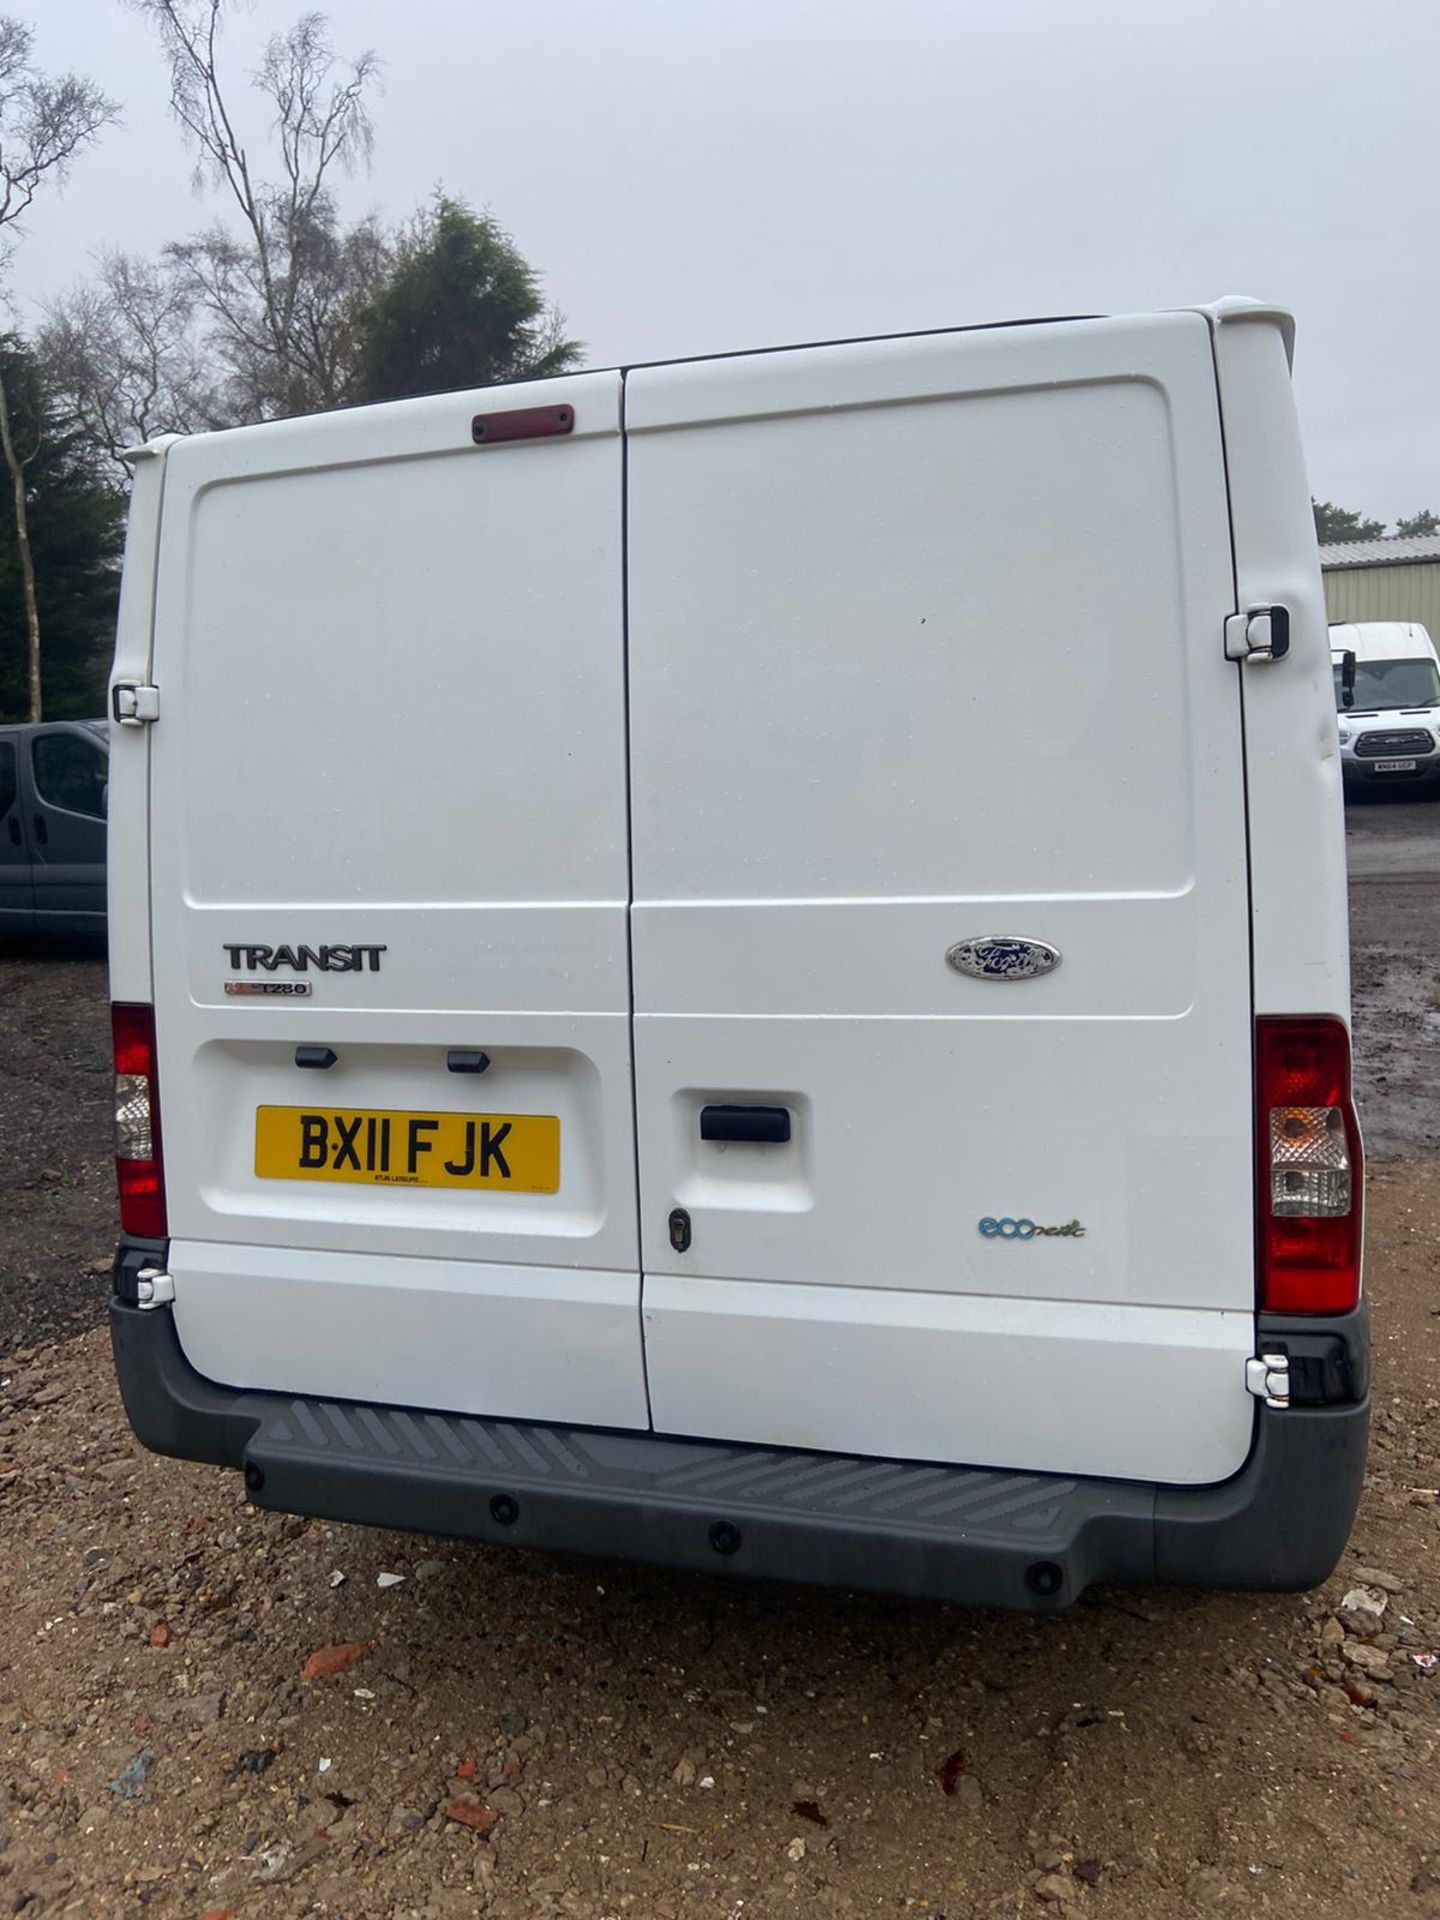 2011/11 REG FORD TRANSIT 115 T280S ECON FW 2.2 DIESEL WHITE PANEL VAN, SHOWING 0 FORMER KEEPERS - Image 5 of 11